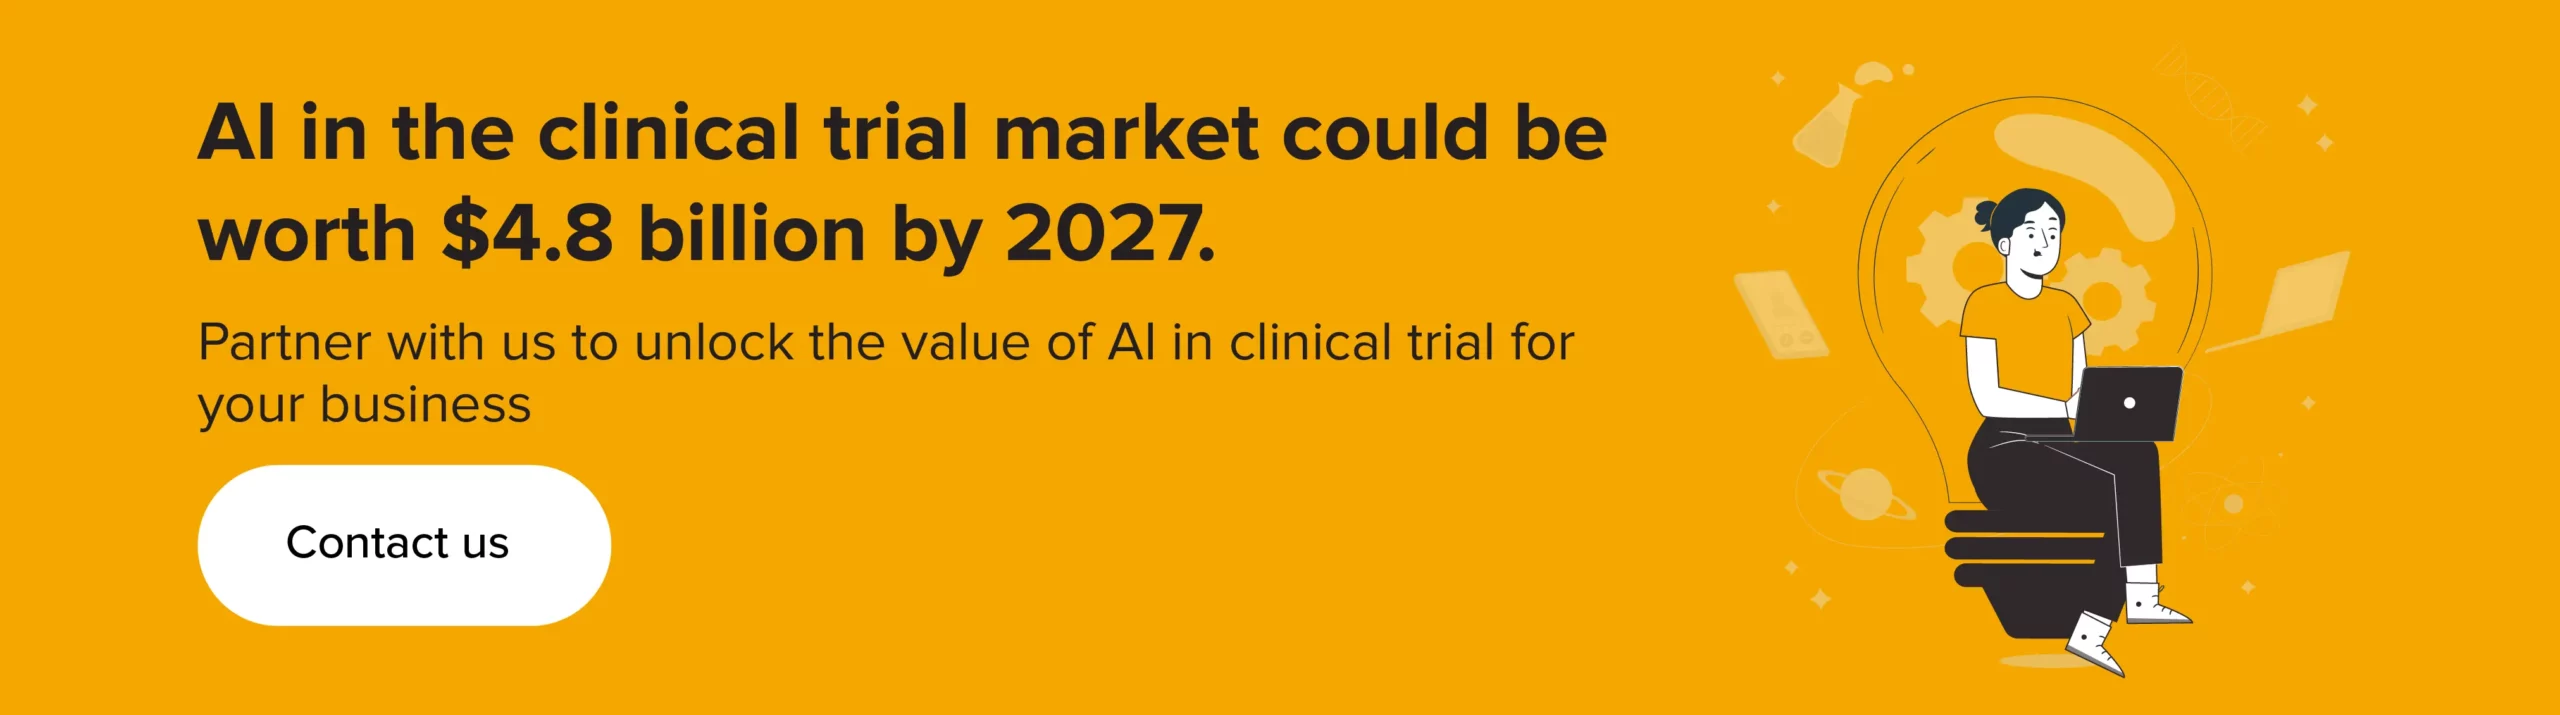 AI in the clinical trial market